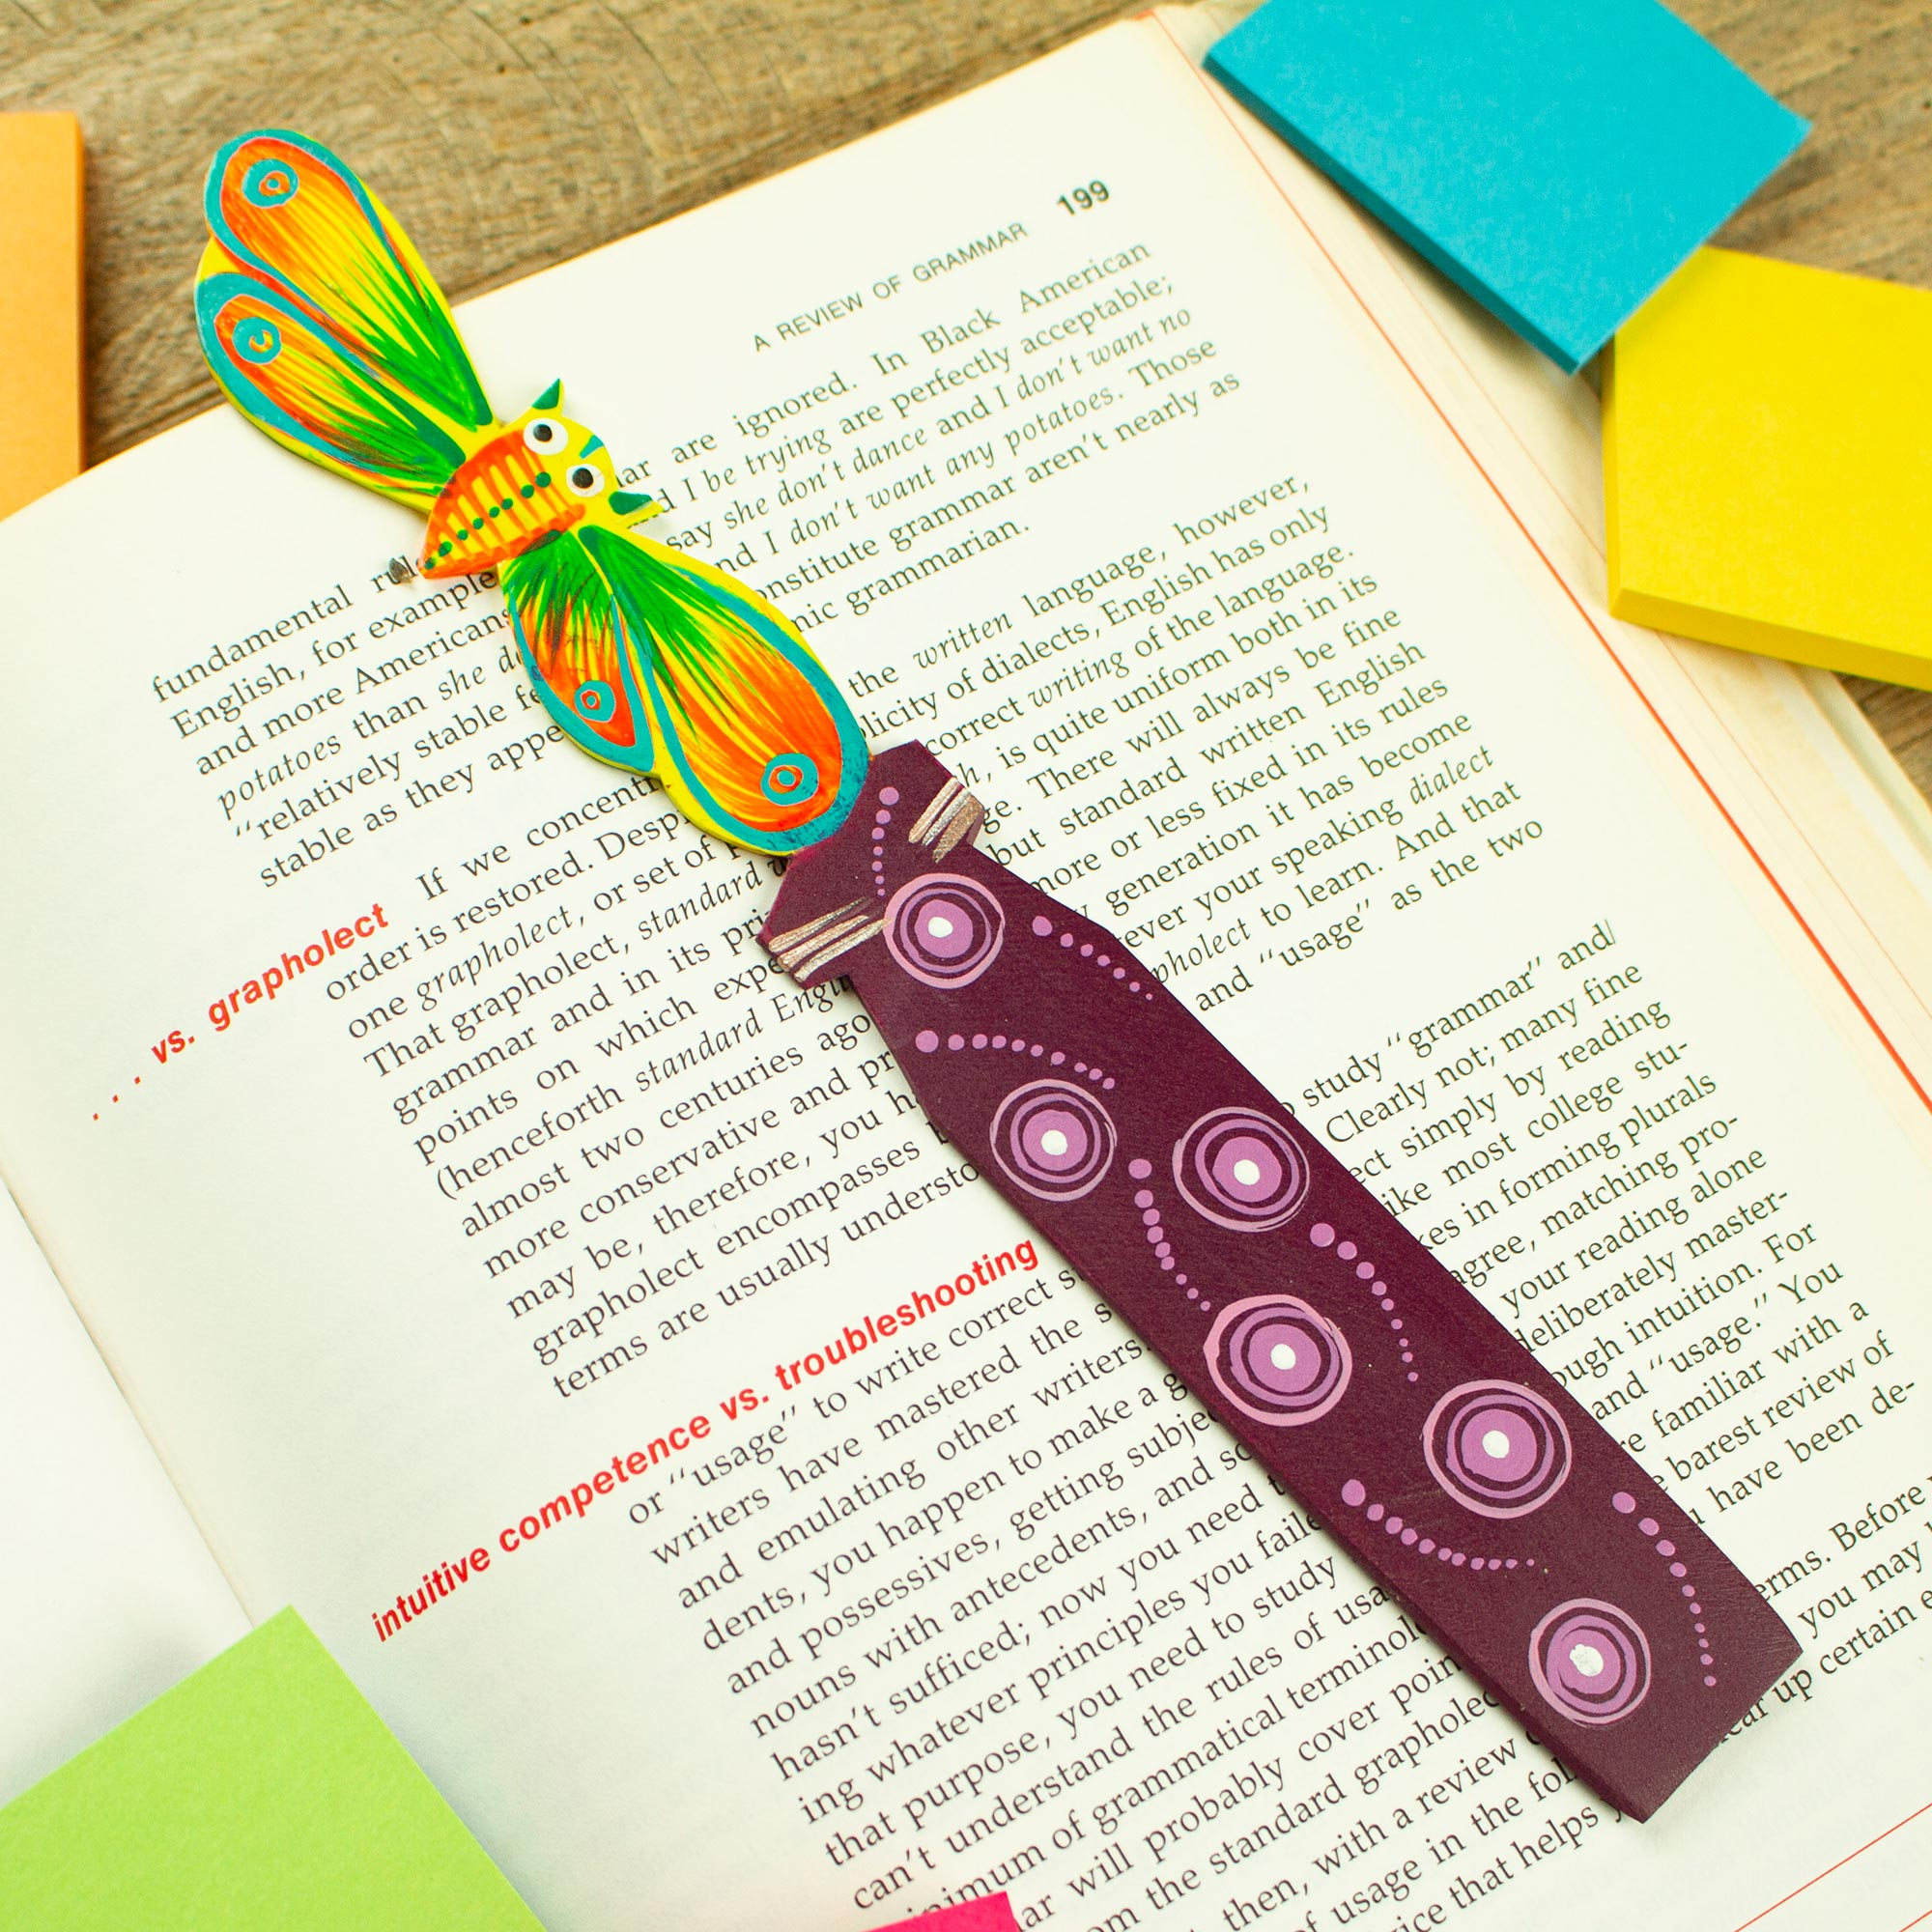 Handmade, Carved And Painted Wooden Bookmarks, Packaged In